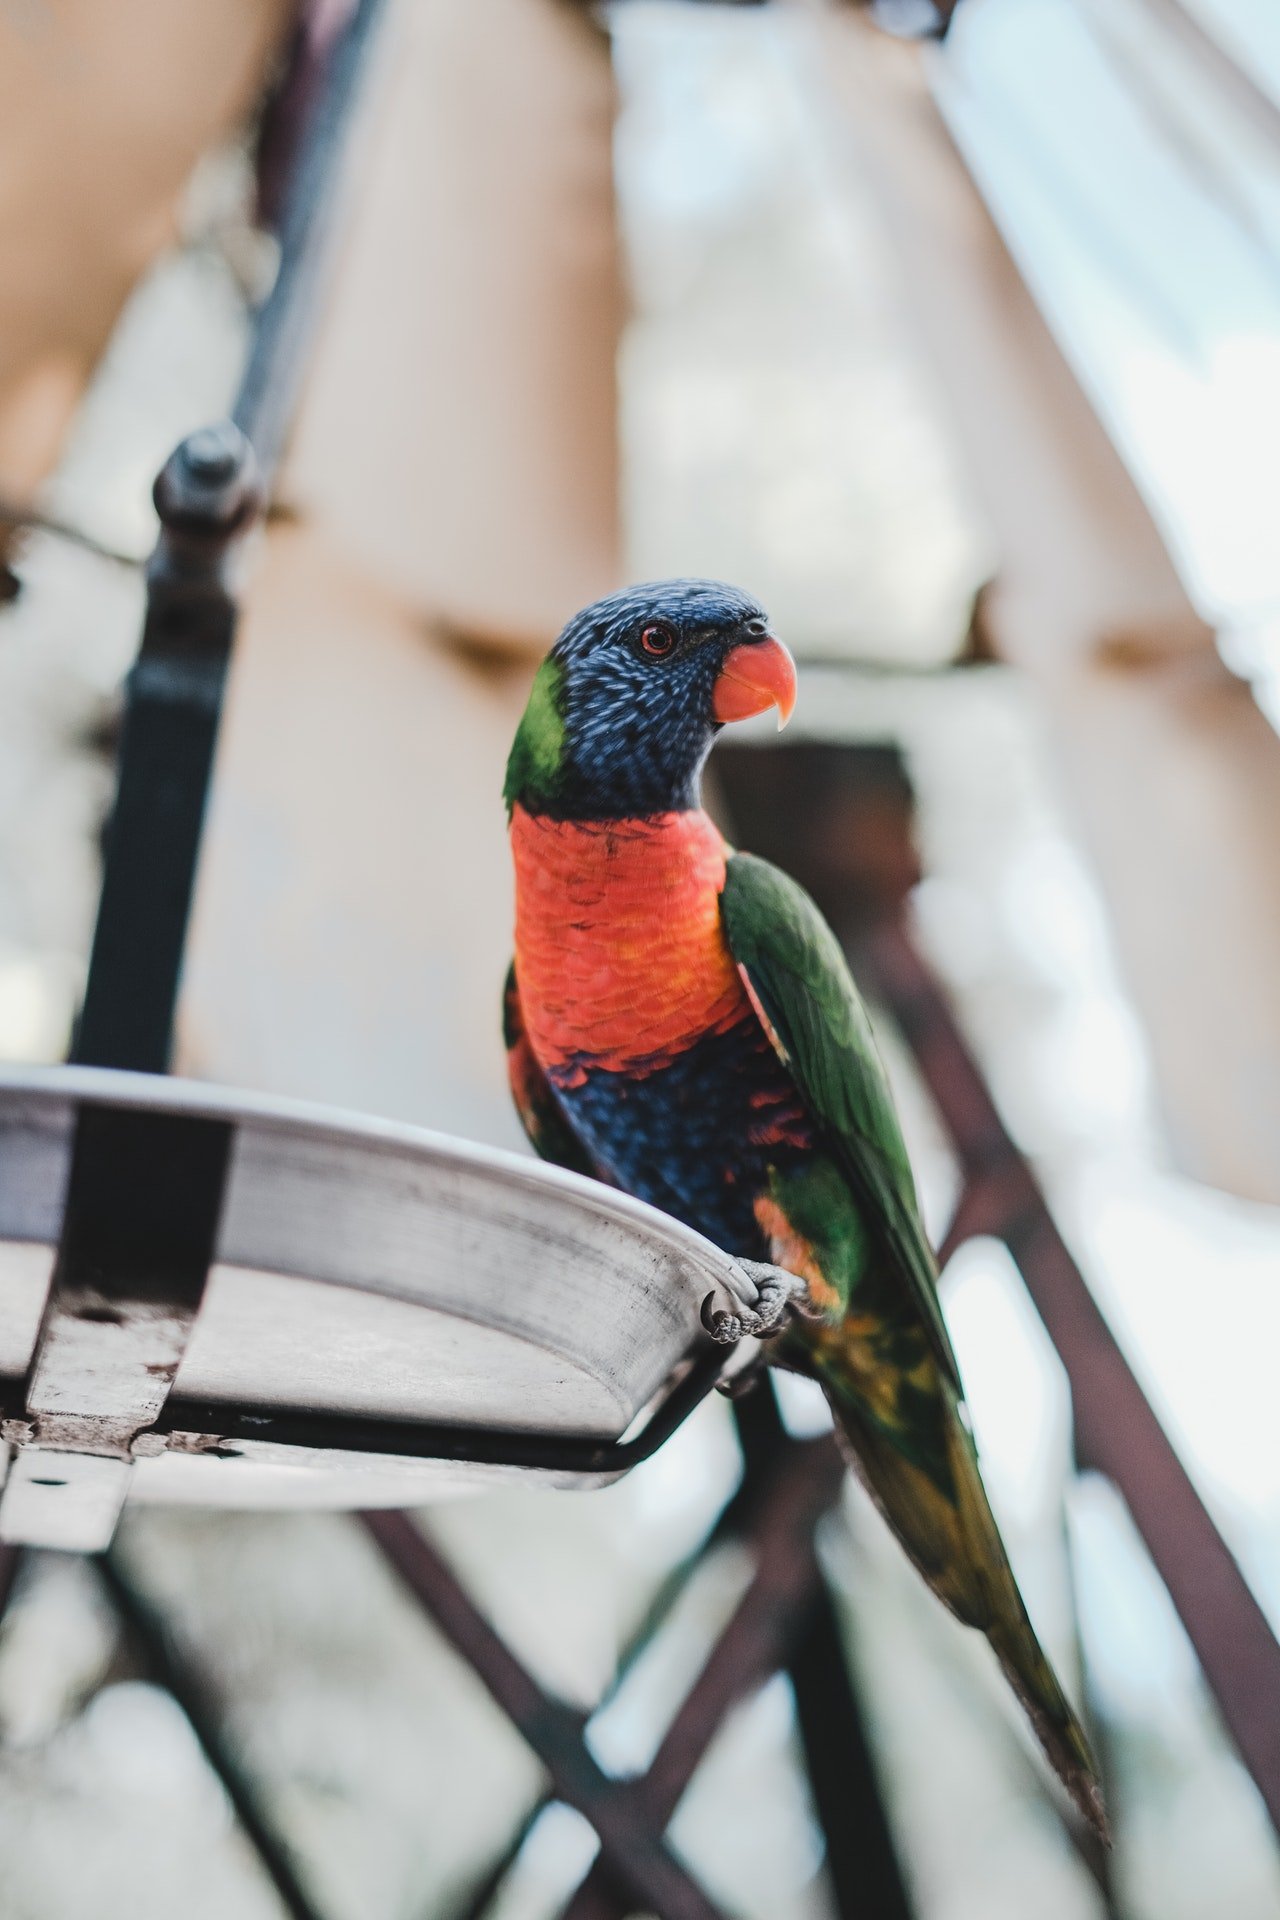 Photo of a colorful parrot | Photo: Pexels